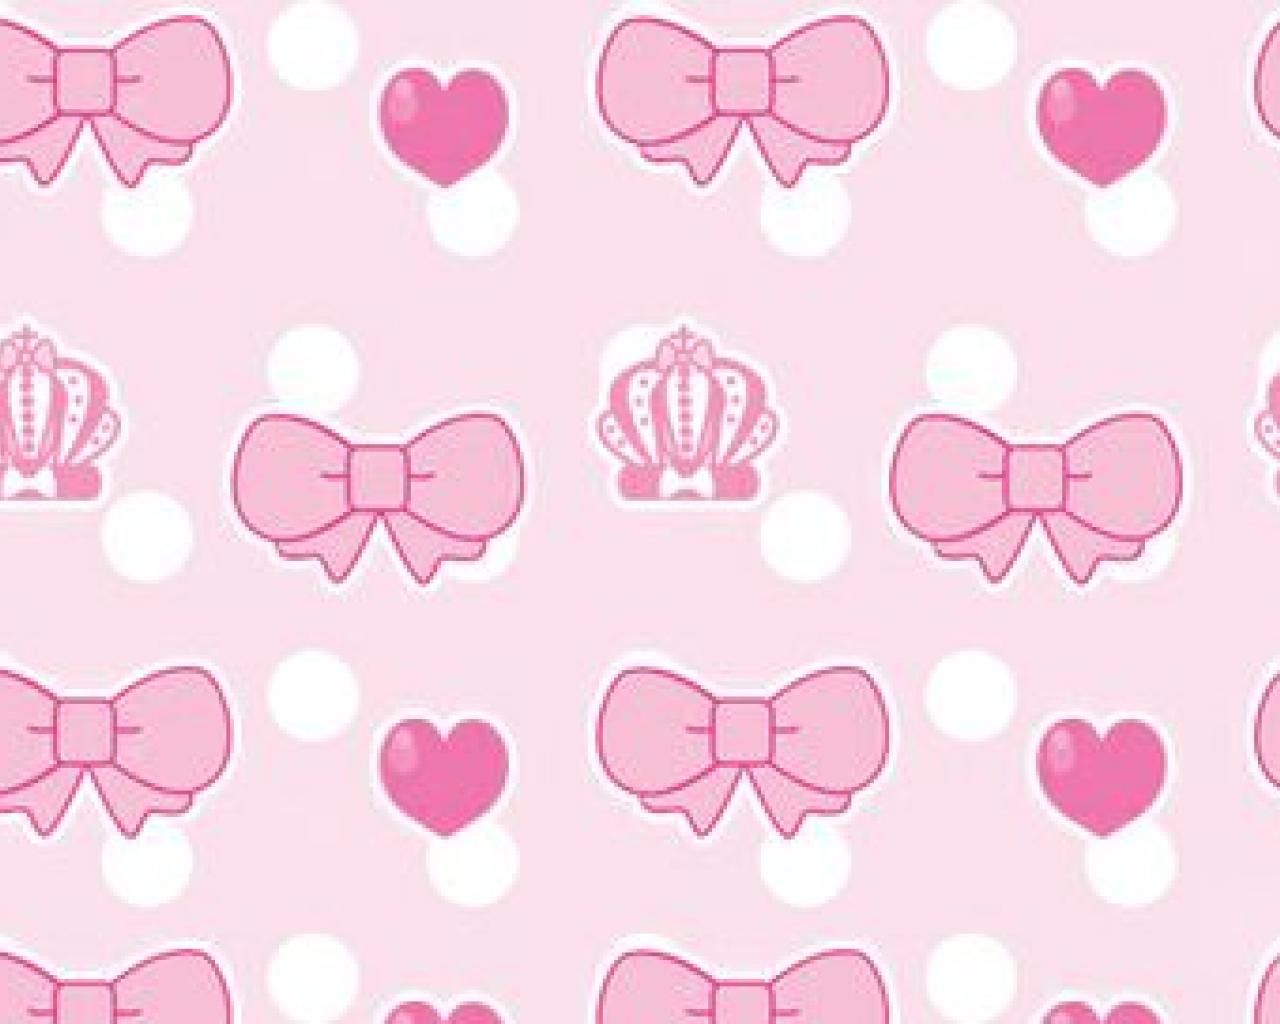 Pastel Goth Wallpapers Desktop posted by Samantha Anderson.